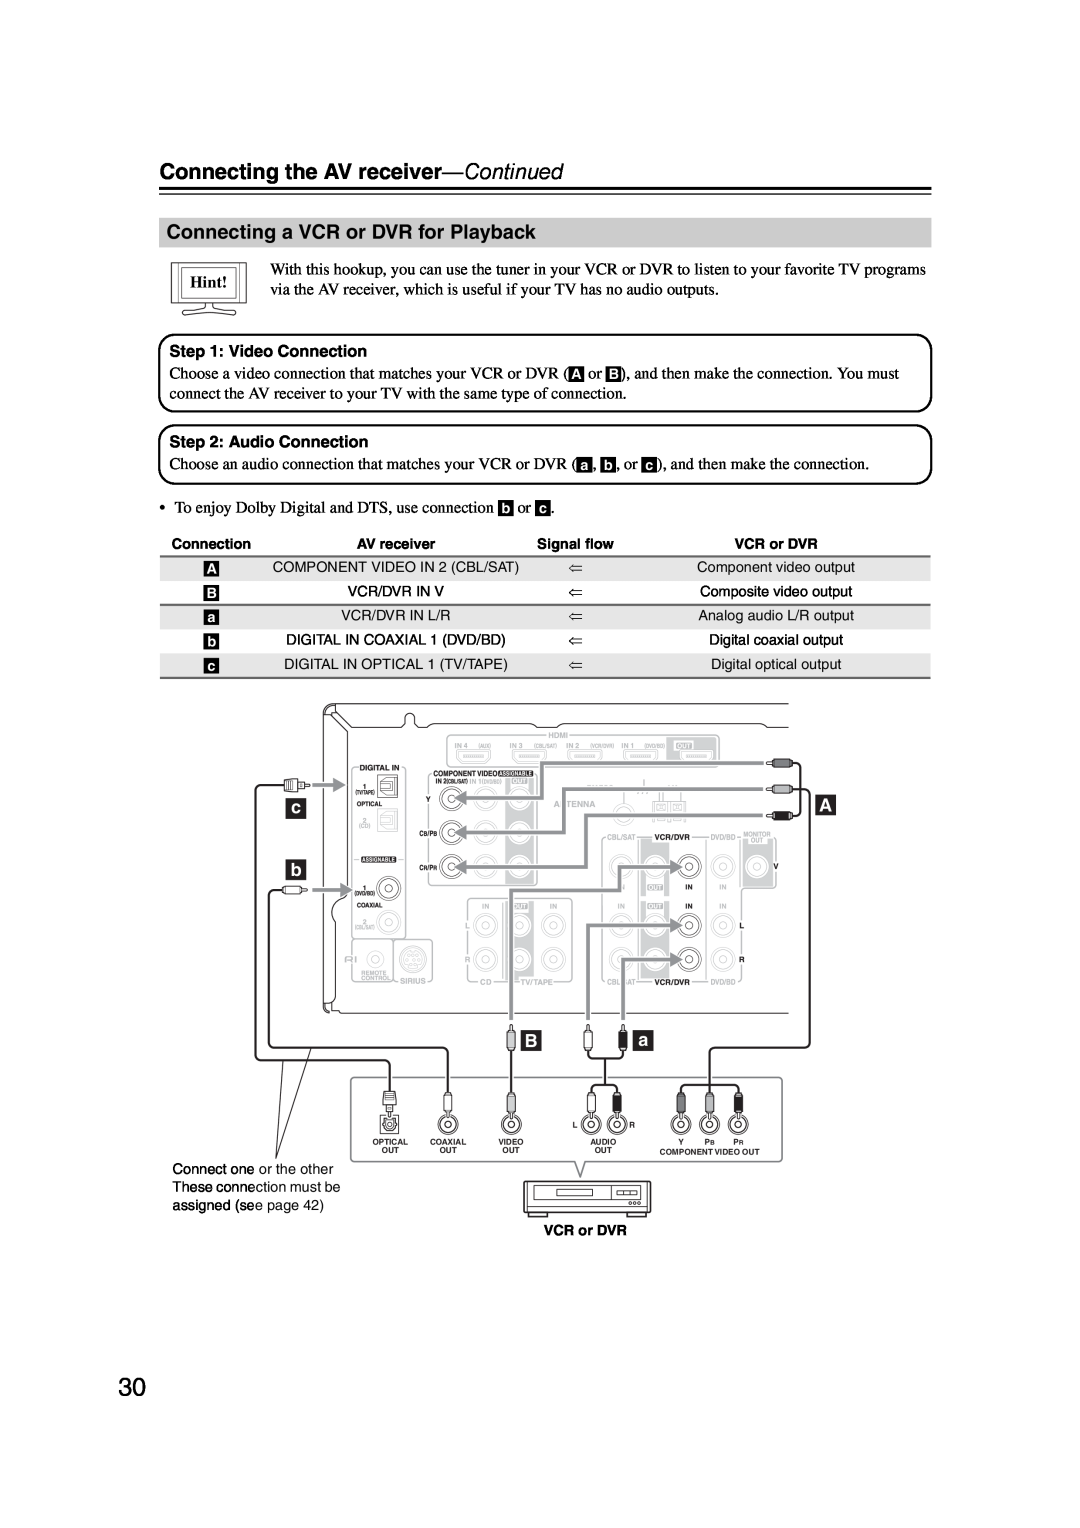 Onkyo 29344934 instruction manual Connecting a VCR or DVR for Playback, Connecting the AV receiver—Continued, Hint 